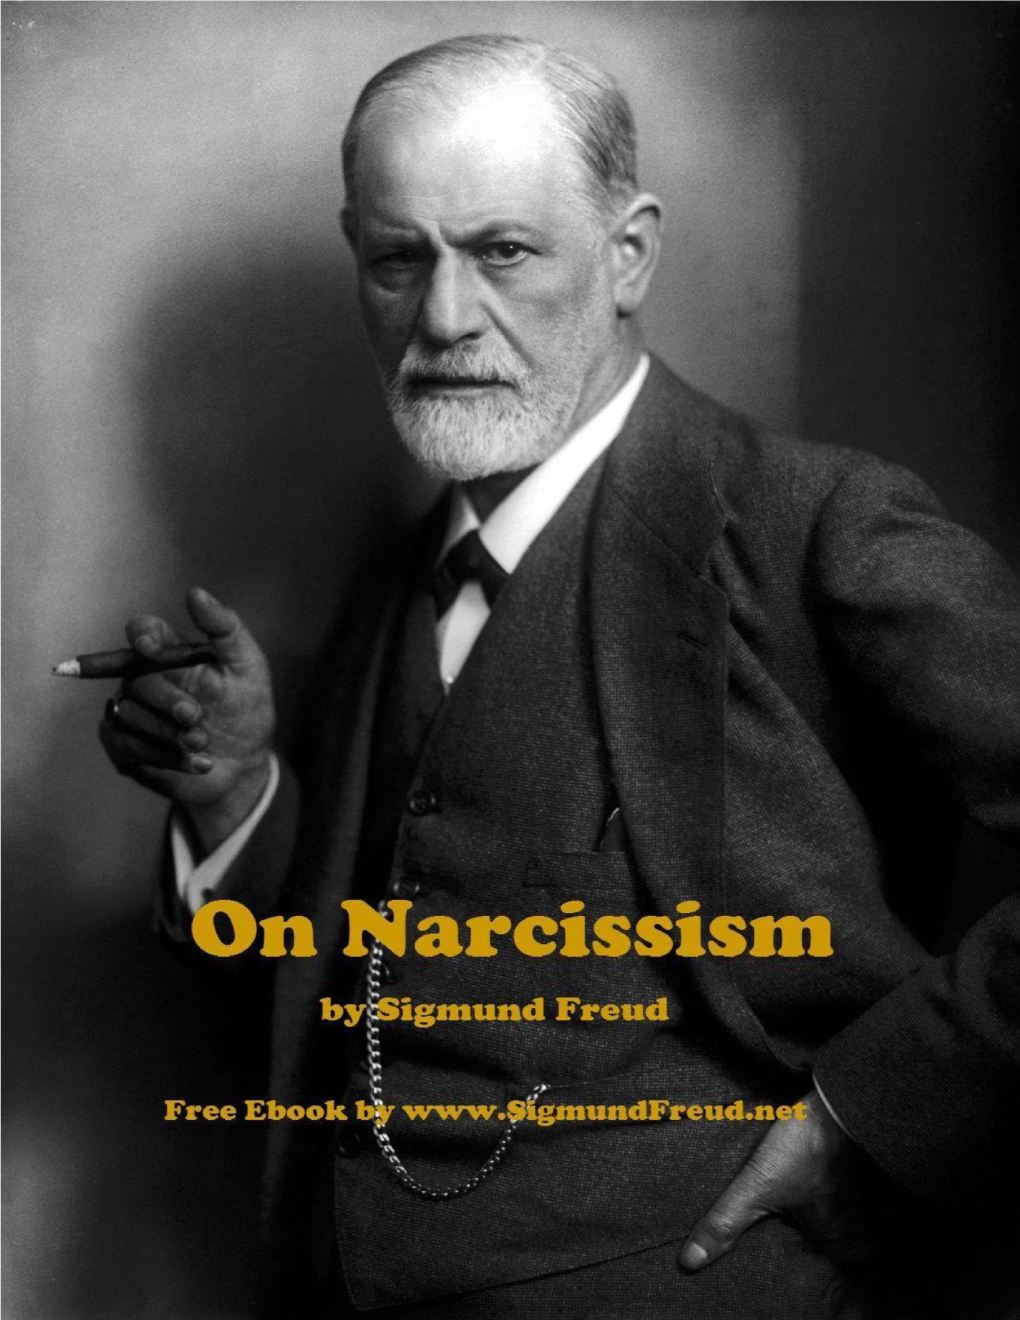 On Narcissism: an Introduction